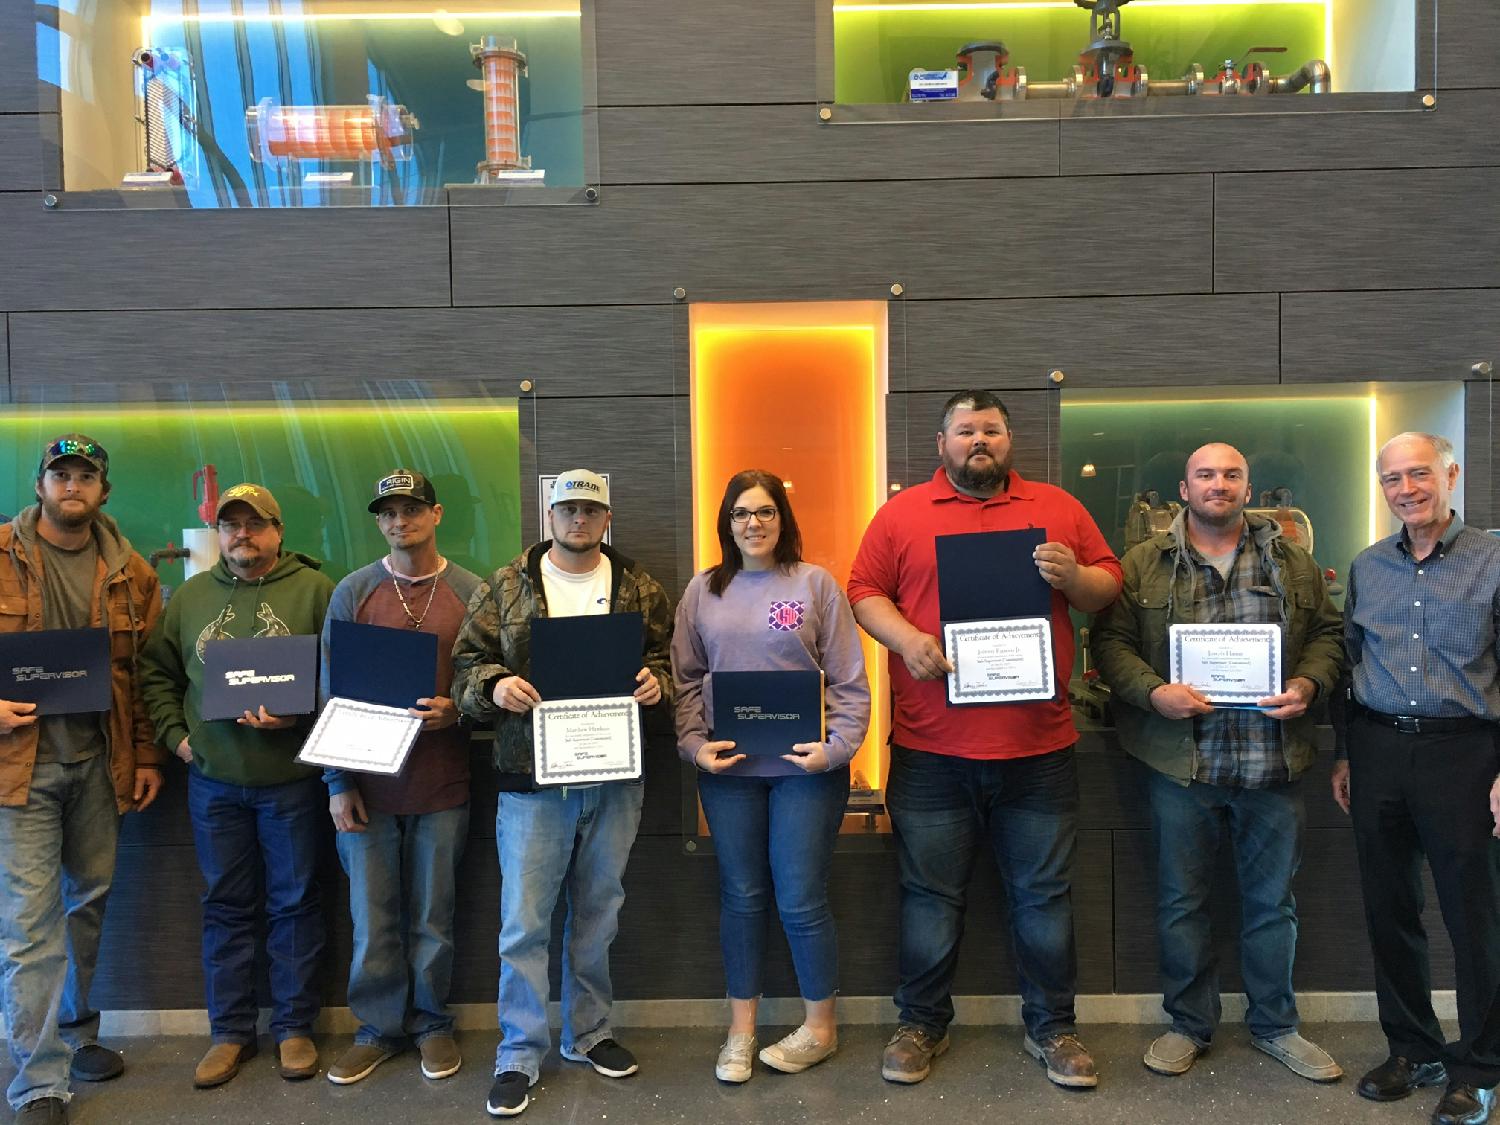 A group of Trade employees showing off their certificates marking their completion of the Safe Supervisor Course. These individuals gained knowledge and skills in OSHA Standards for the Construction Industry.